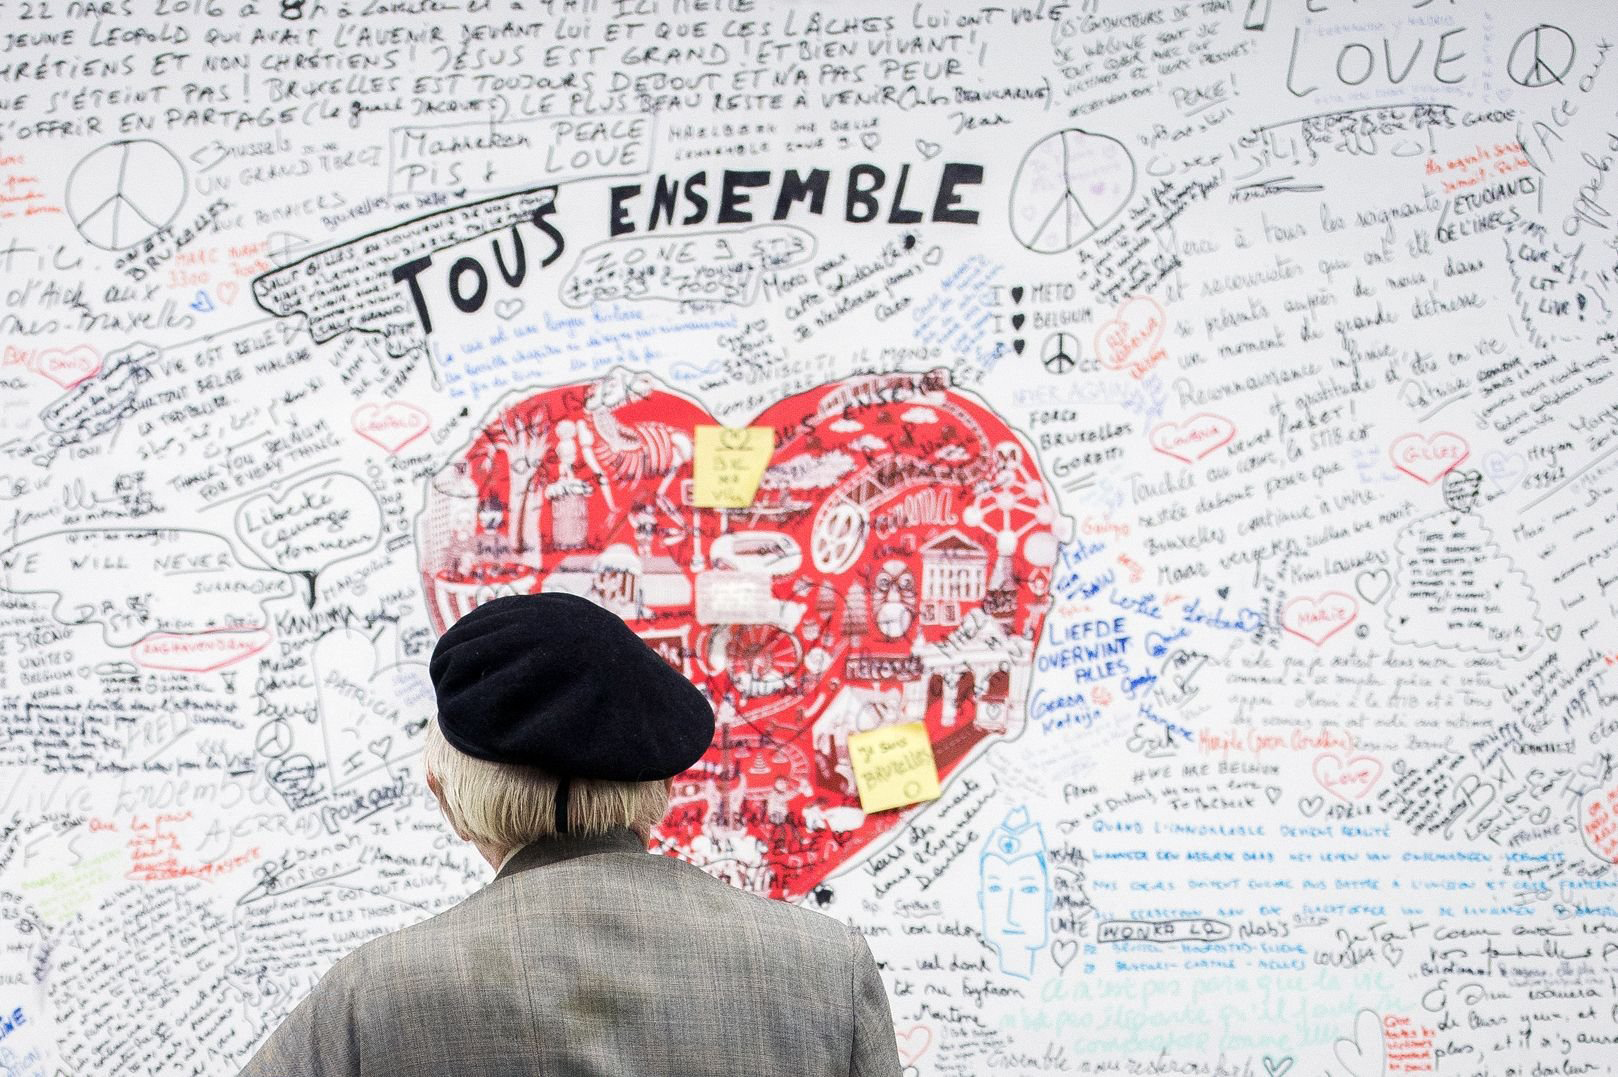 A man looks at a memorial panel for the victims of the March 22 attacks at the entrance of the Maelbeek-Maalbeek subway station in Brussels on May 11, 2016. (Laurie Dieffembacq—AFP/Getty Images)